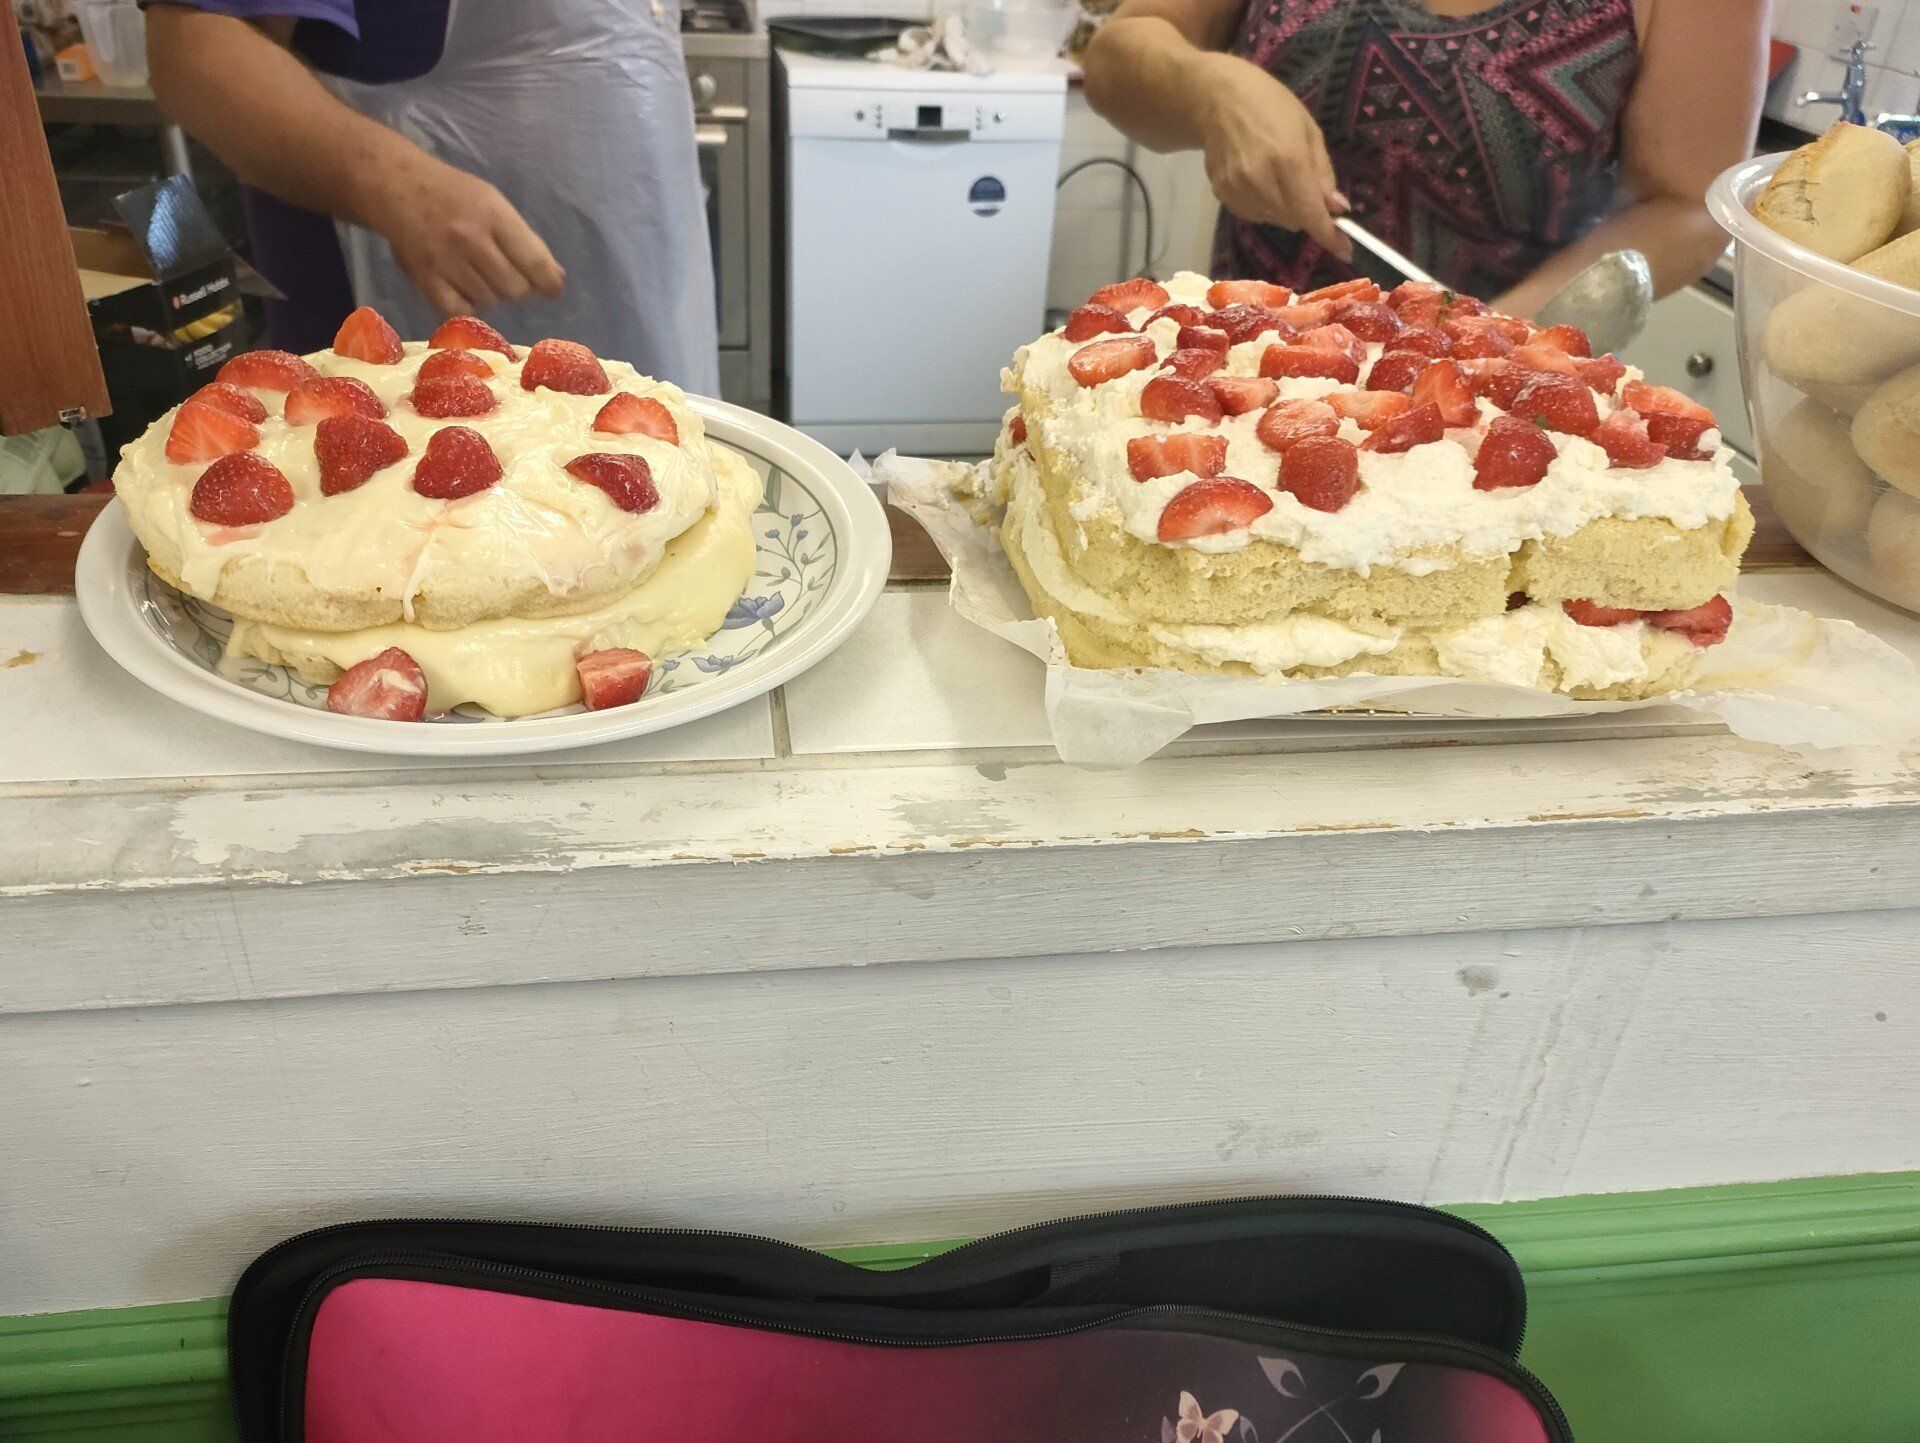 Photo of two large strawberry and cream cakes at serving hatch to kitchen, one round and one square